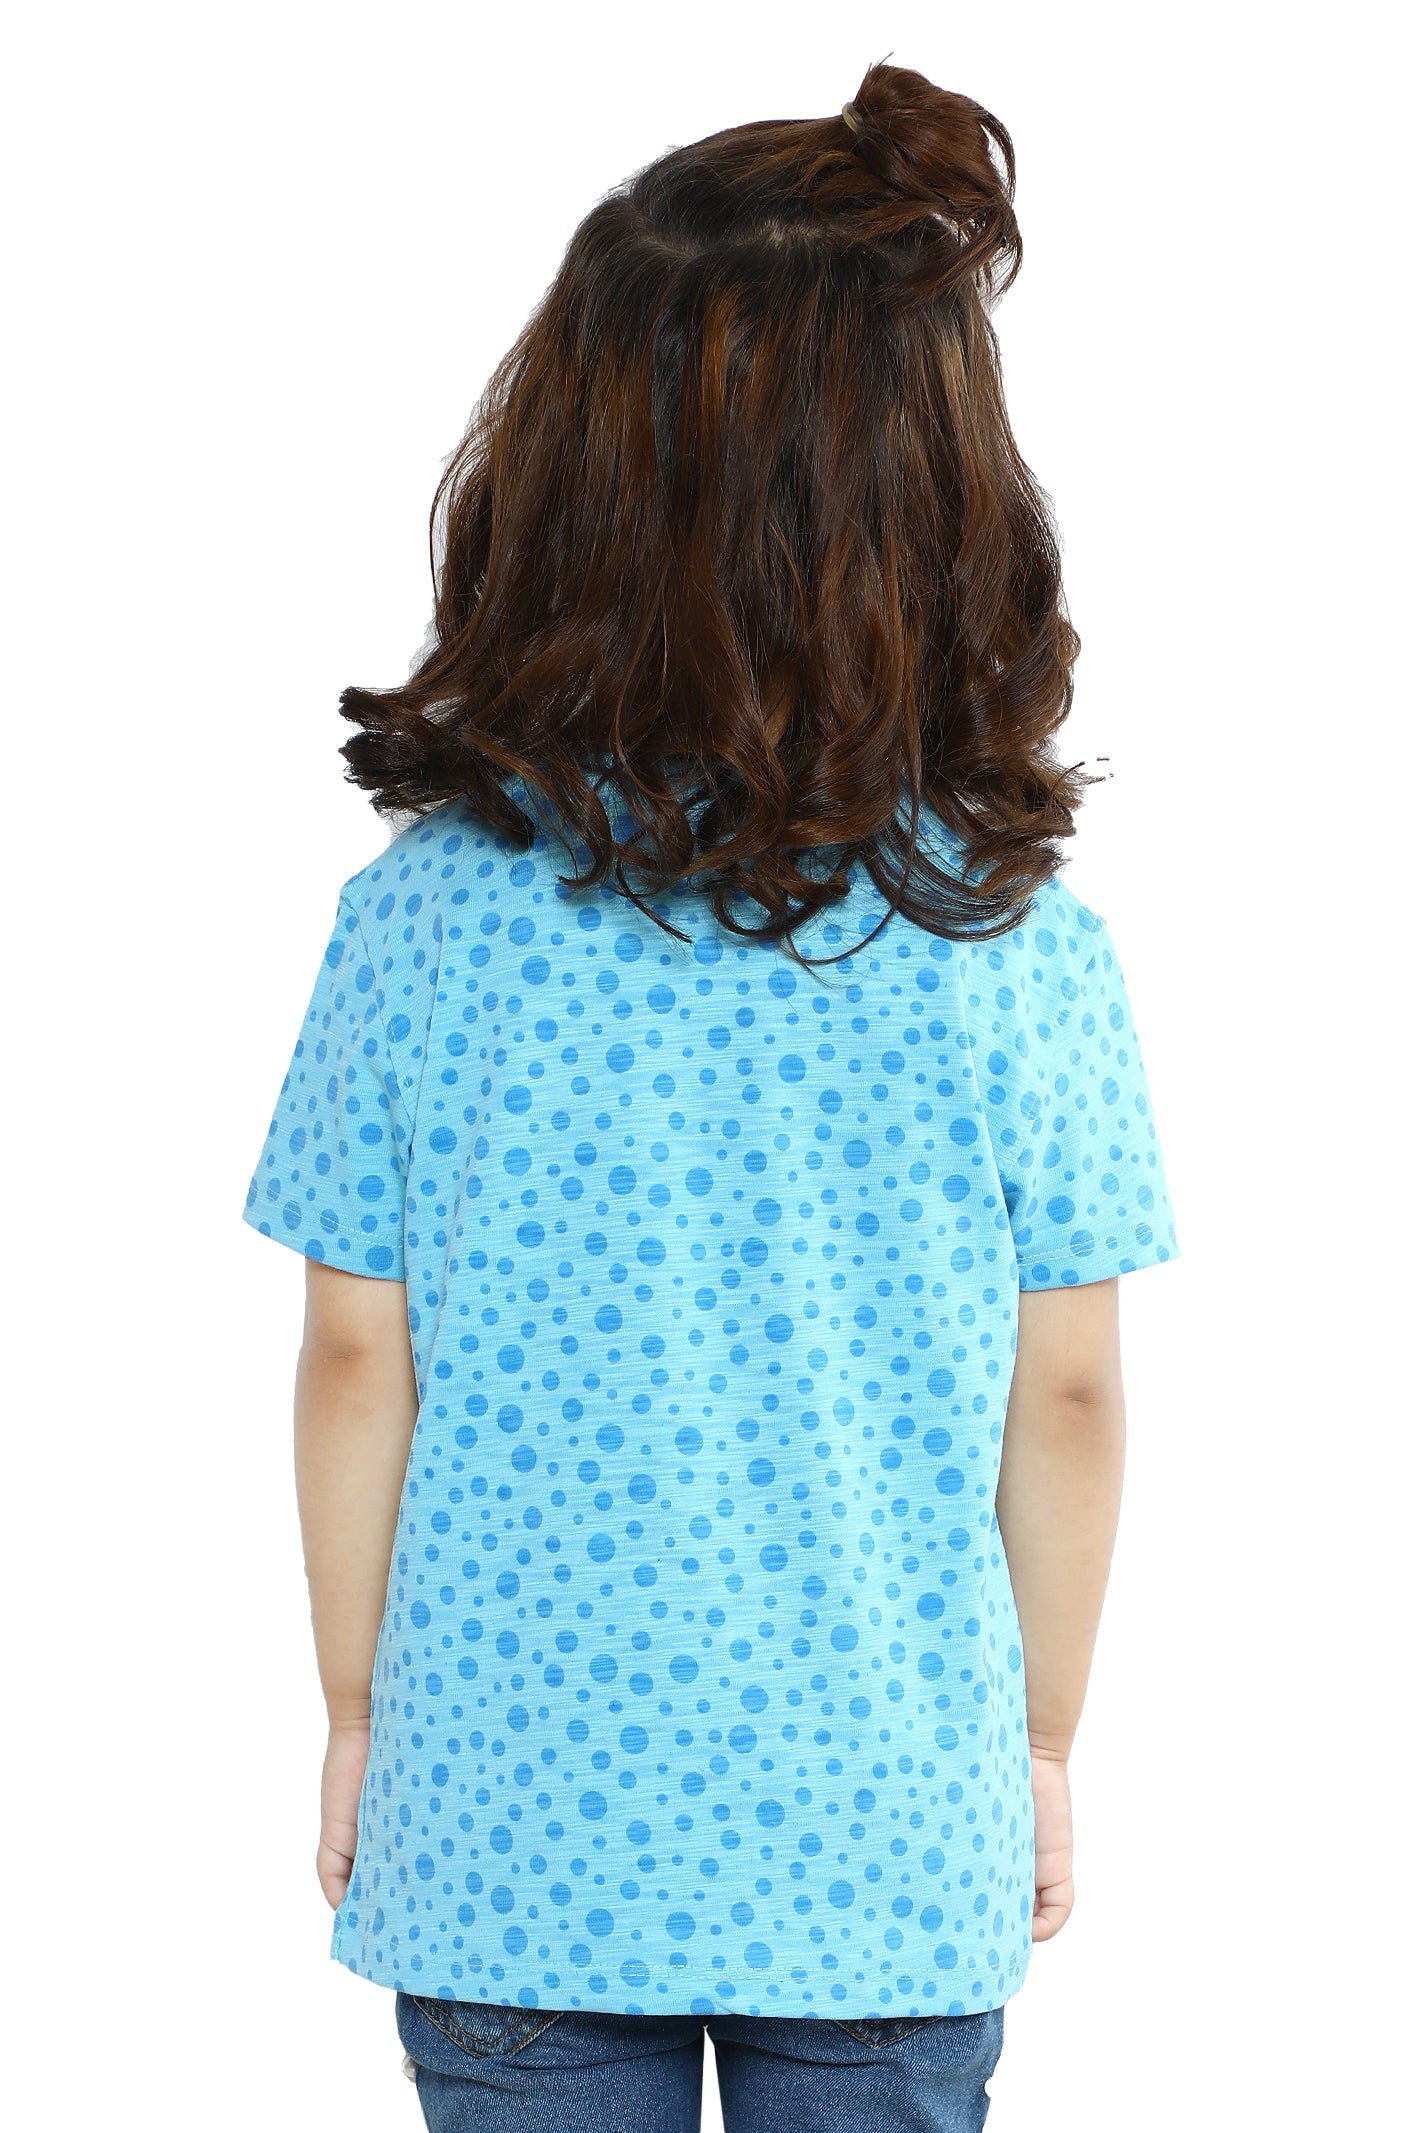 Girls T-Shirt In Turquoise SKU: KGA-0225-TURQUOISE - Diners